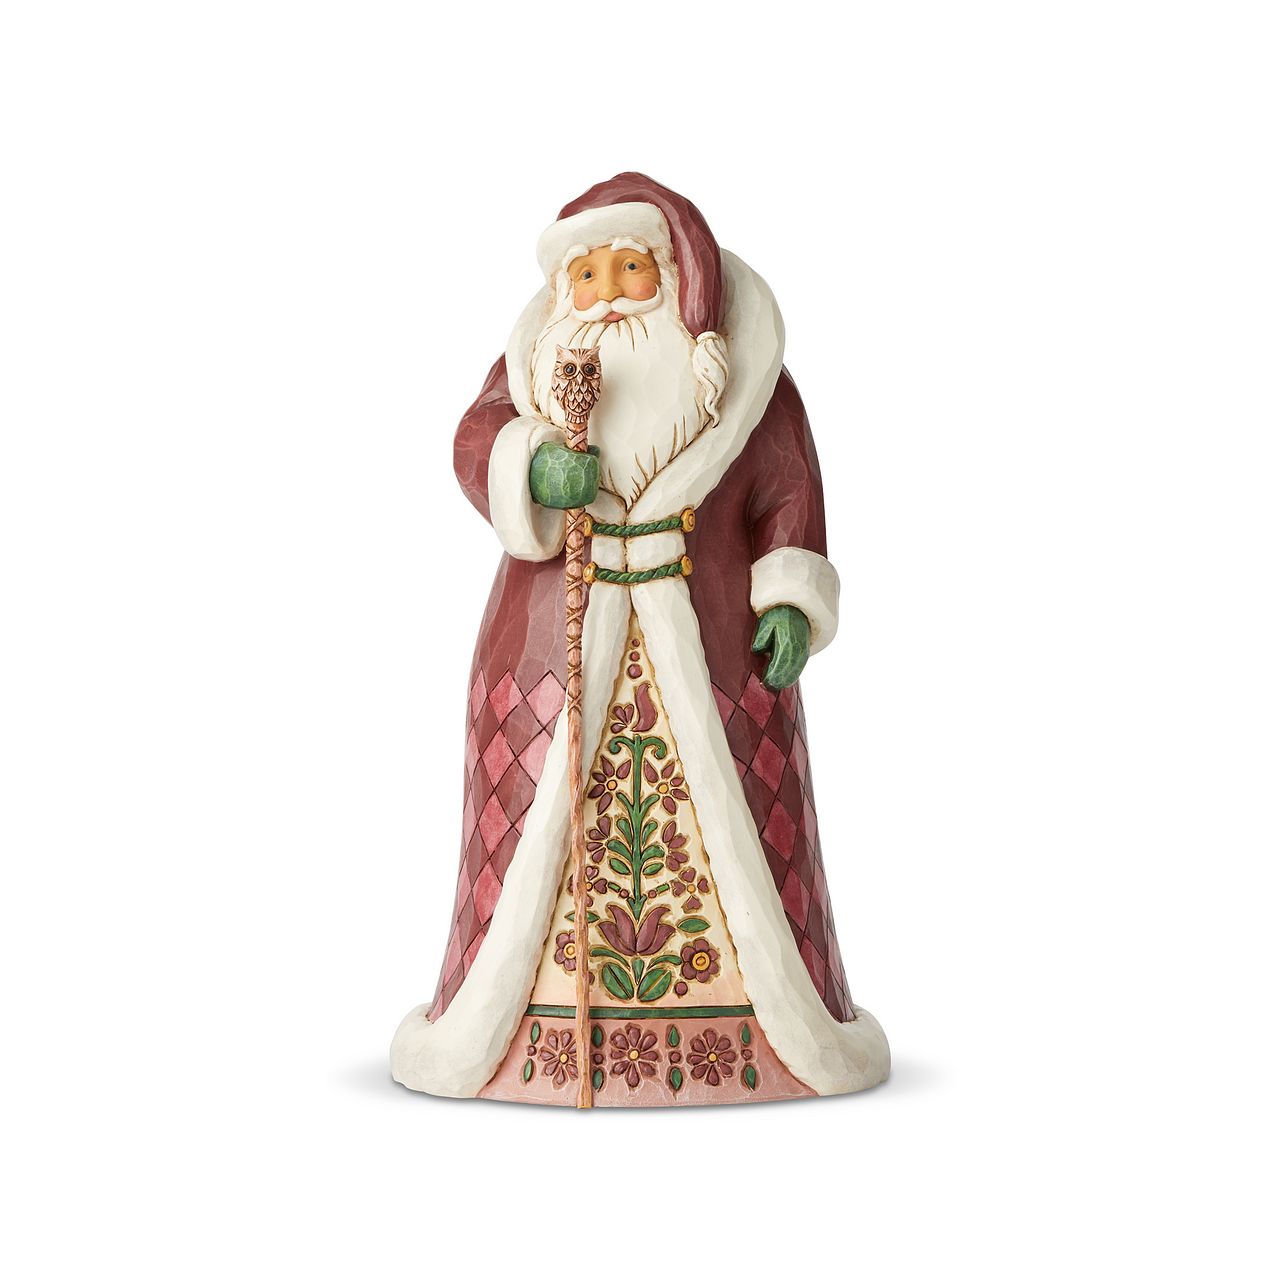 Jim Shore Heartwood Creek Quietly He Comes - Regal Santa  Handcrafted in incredible detail, this colourful Regal Santa with his Owl Cane features Jim Shore's signature combination of patterns inspired by quilting and authentic design drawn from the folk-art tradition known as Pennsylvania Dutch.